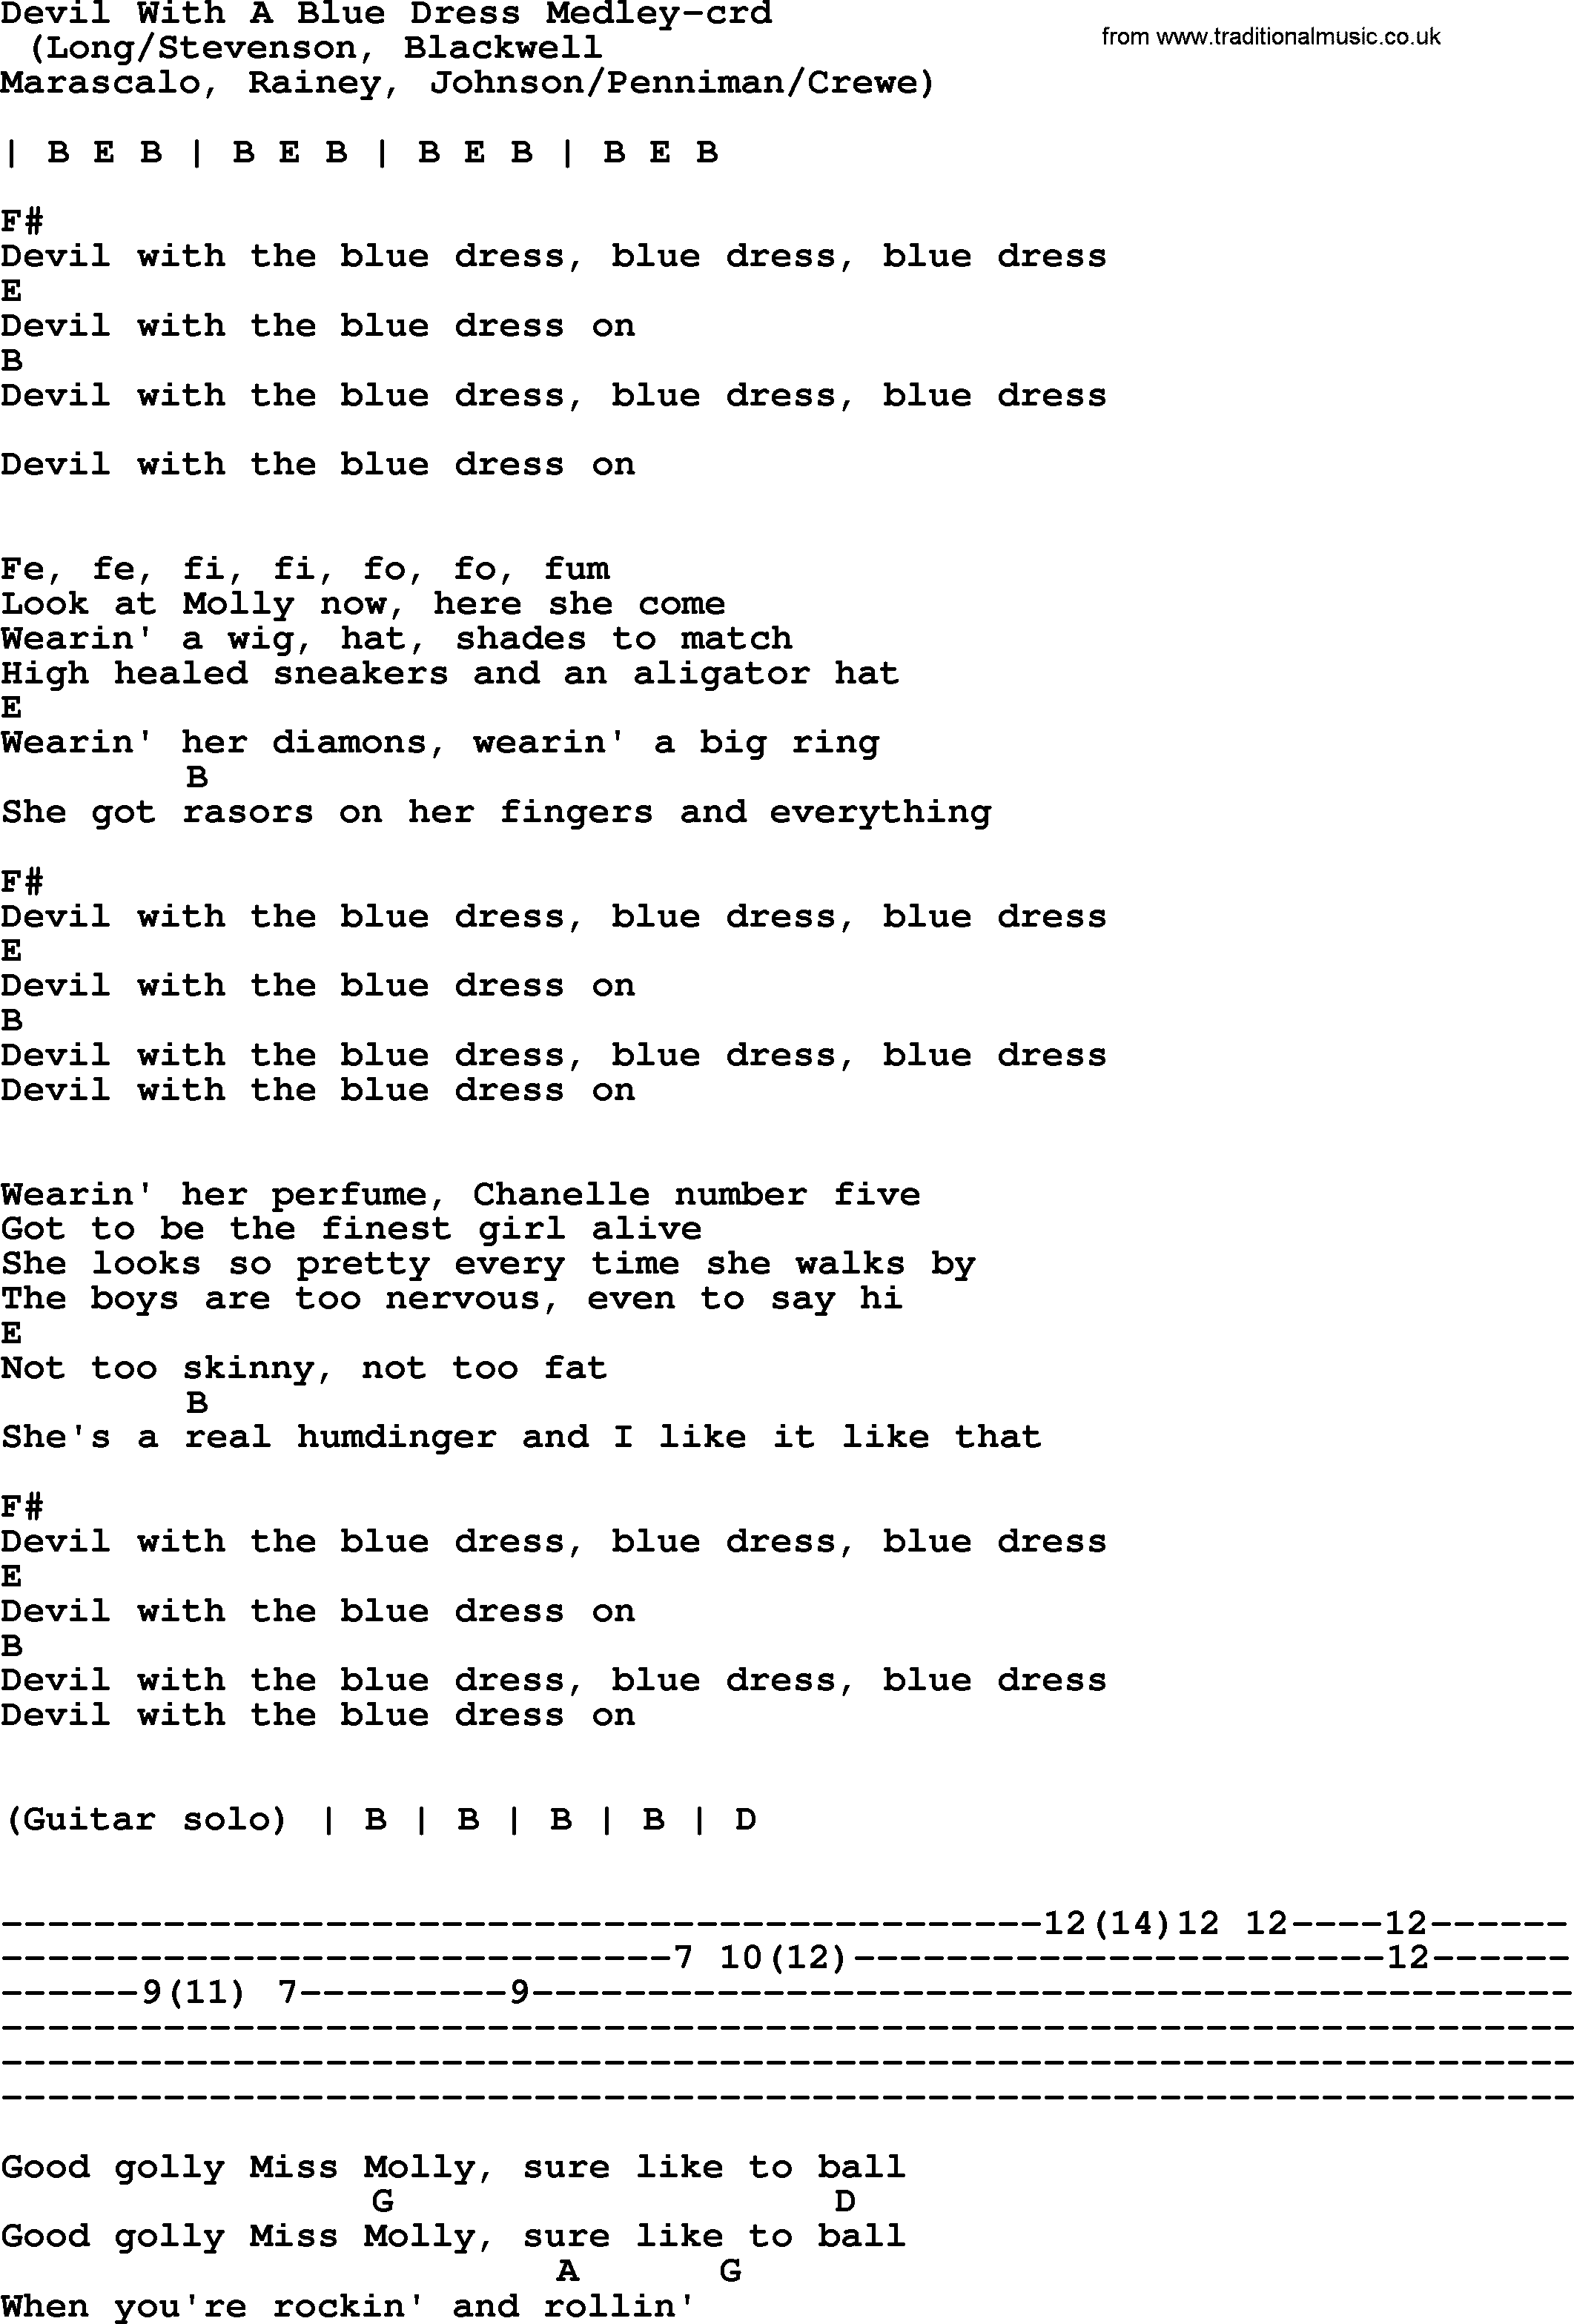 Bruce Springsteen song: Devil With A Blue Dress Medley, lyrics and chords